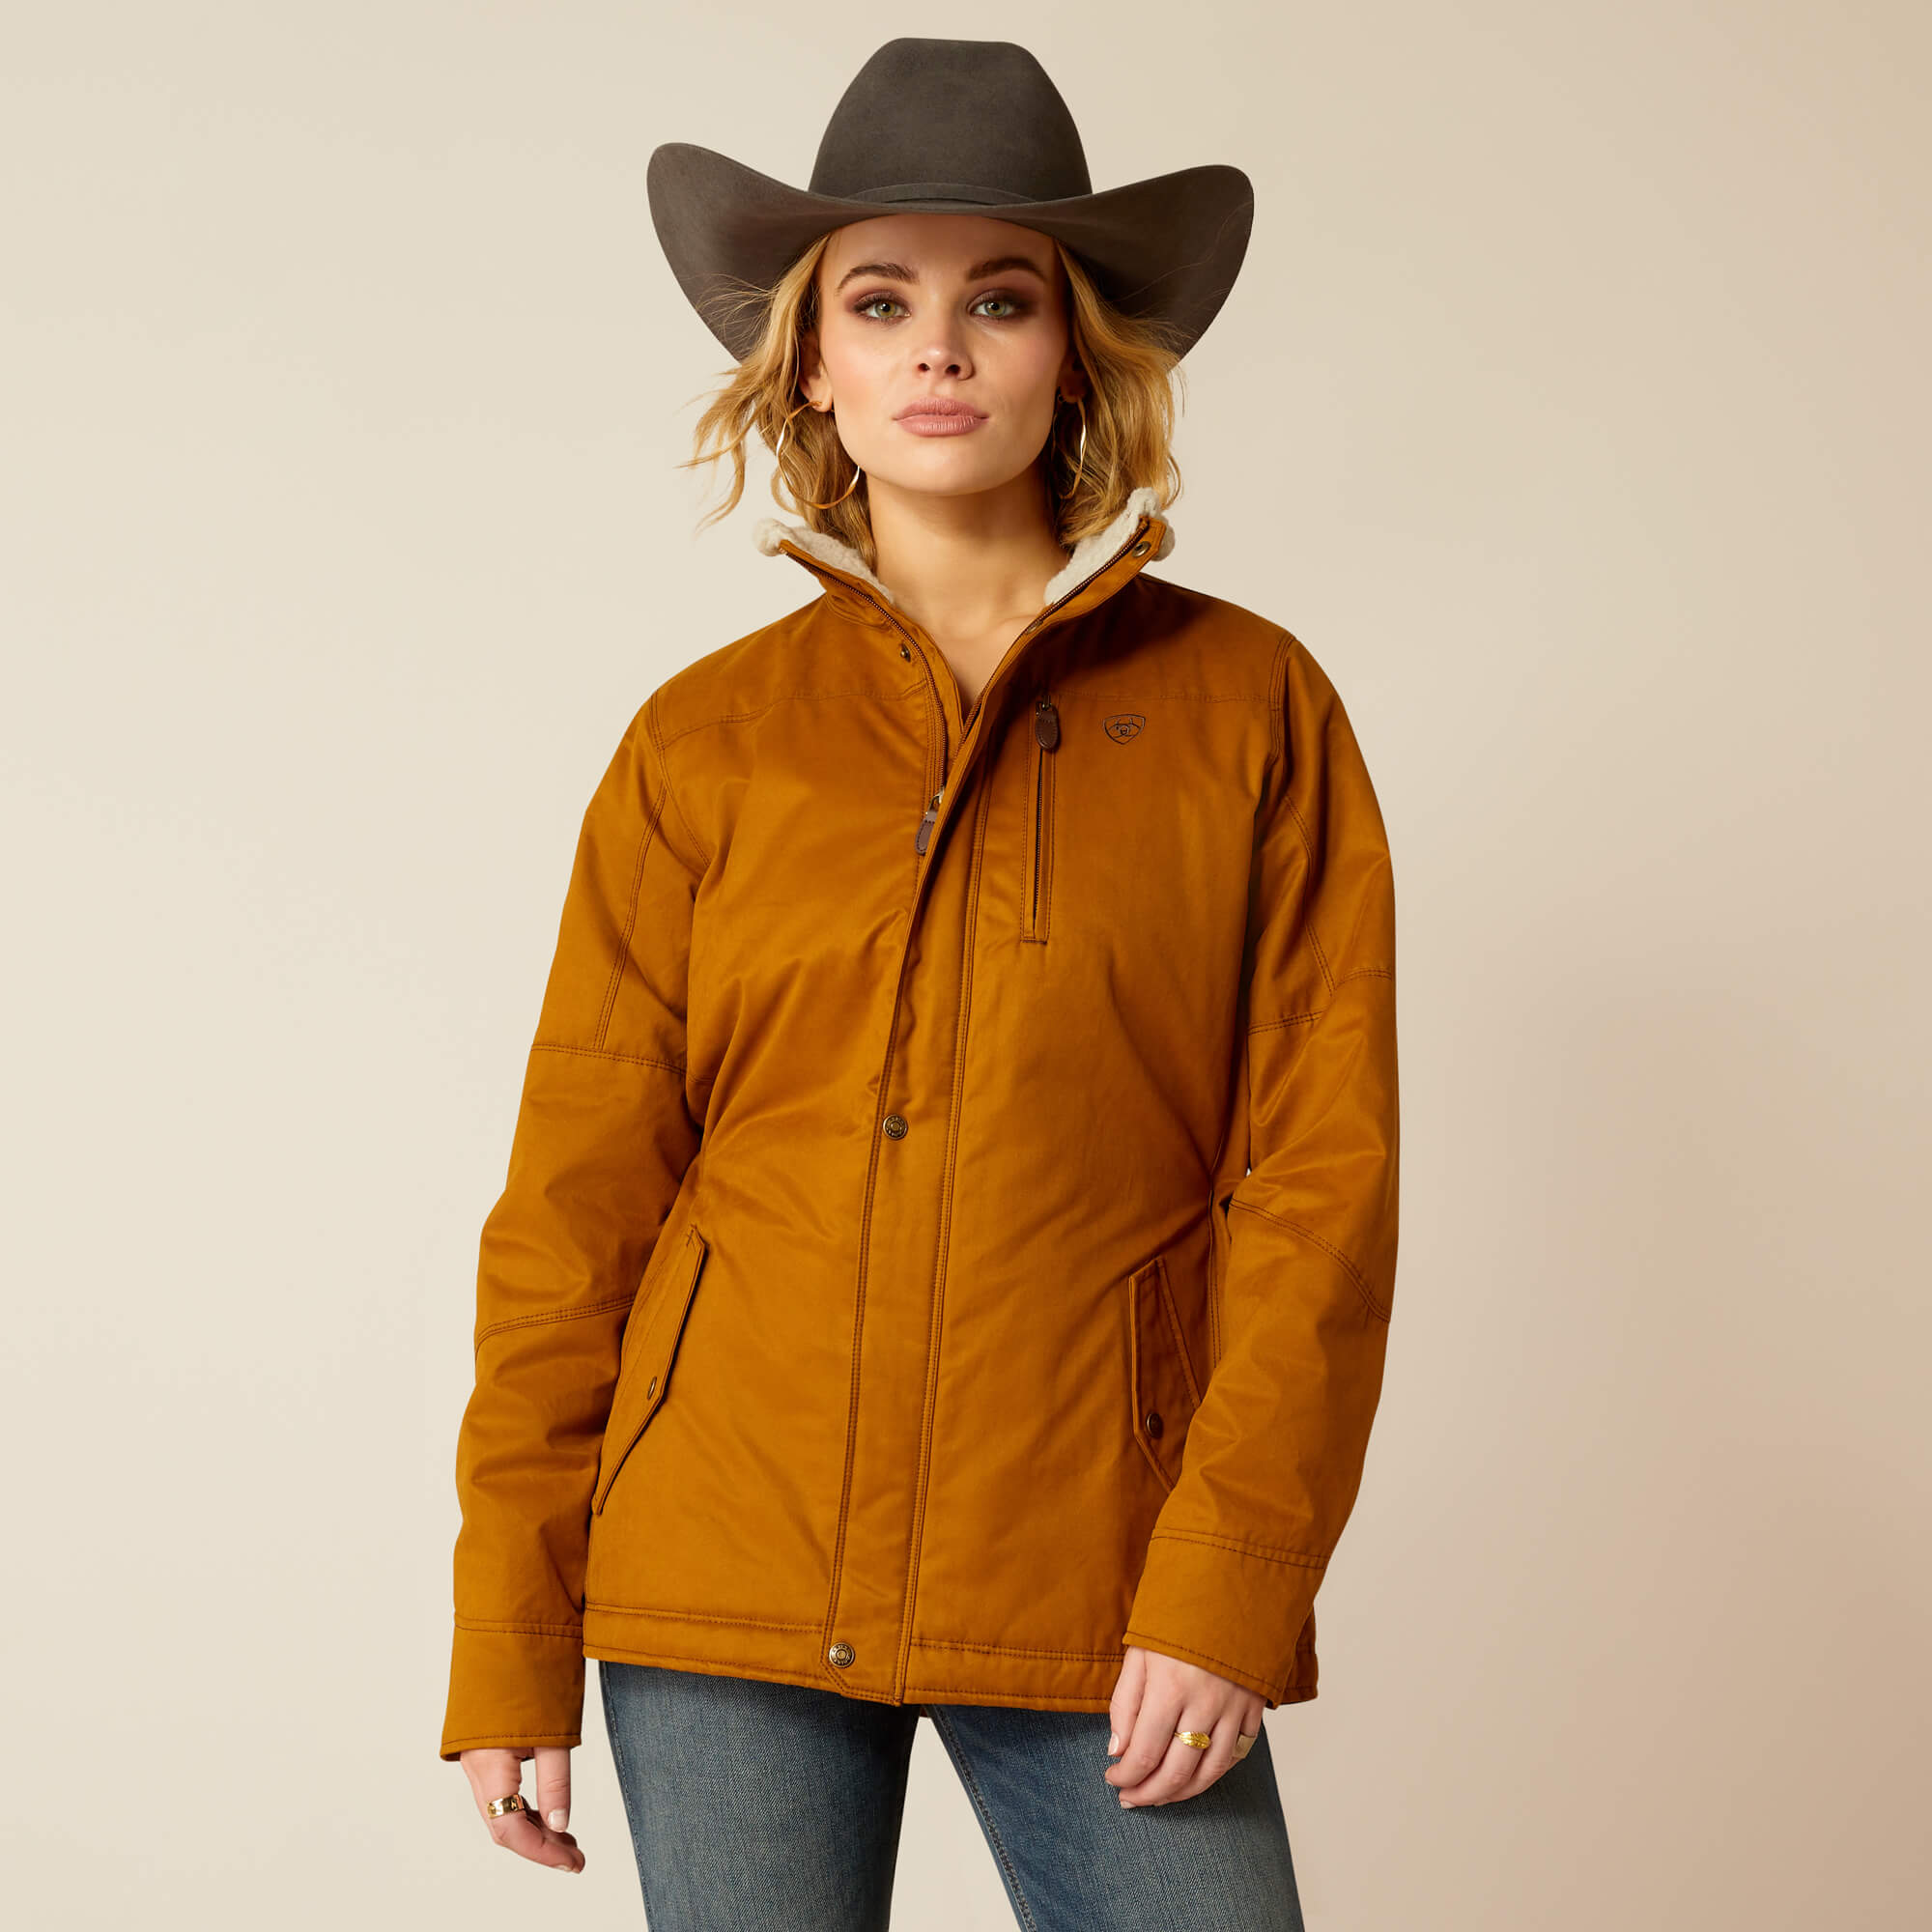 Ariat Womens Grizzly Insulated Jacket (Chestnut)